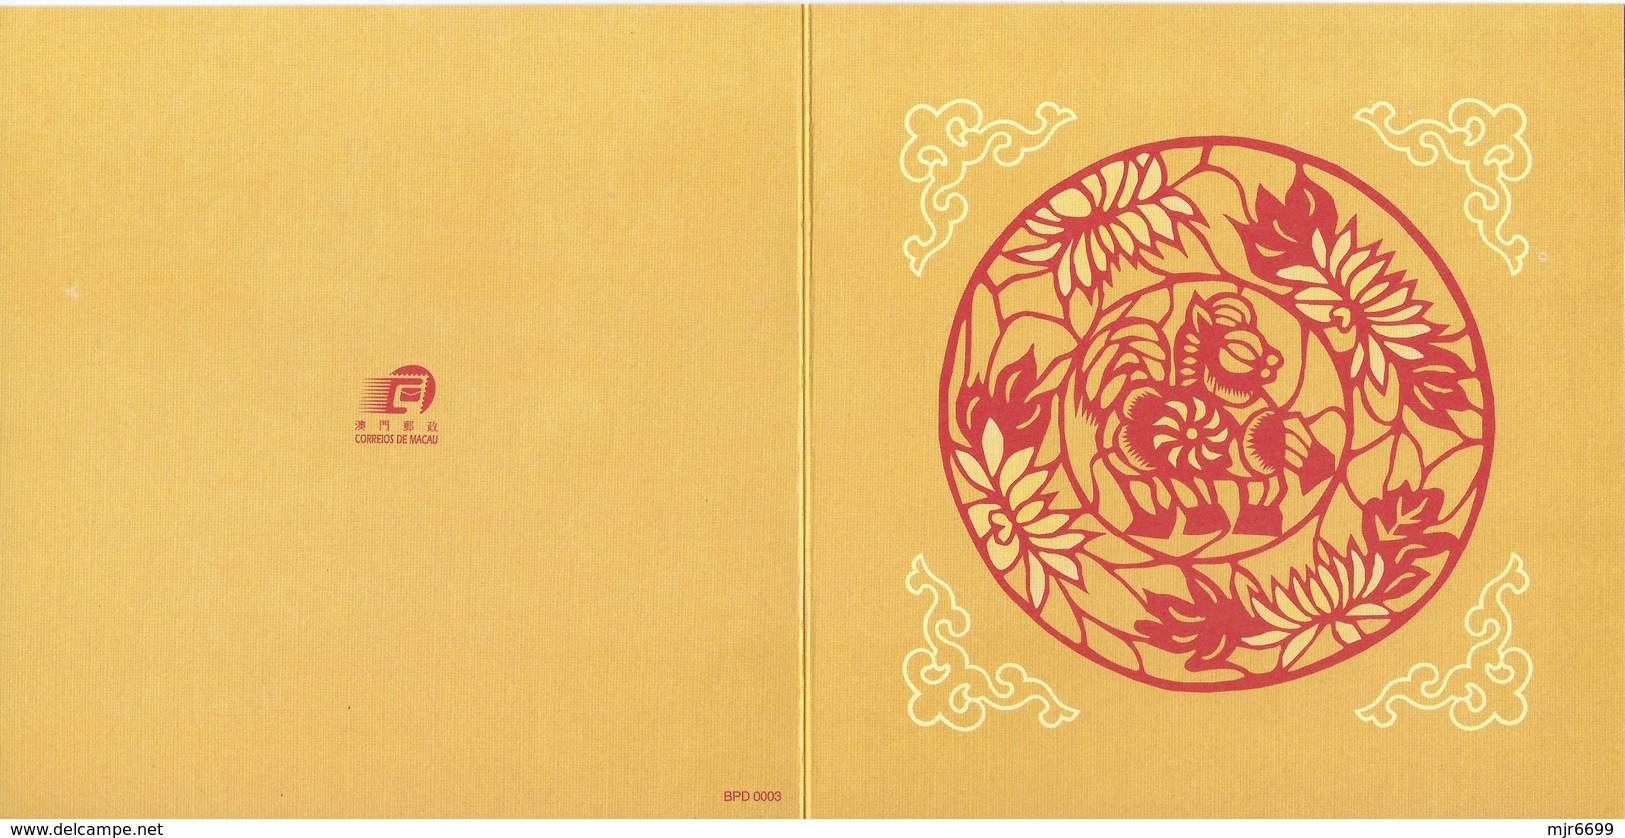 MACAU 2002 LUNAR NEW YEAR OF THE HORSE GREETING CARD & POSTAGE PAID COVER, LOCAL USAGE,  POST OFFICE CODE #BPD003 - Interi Postali